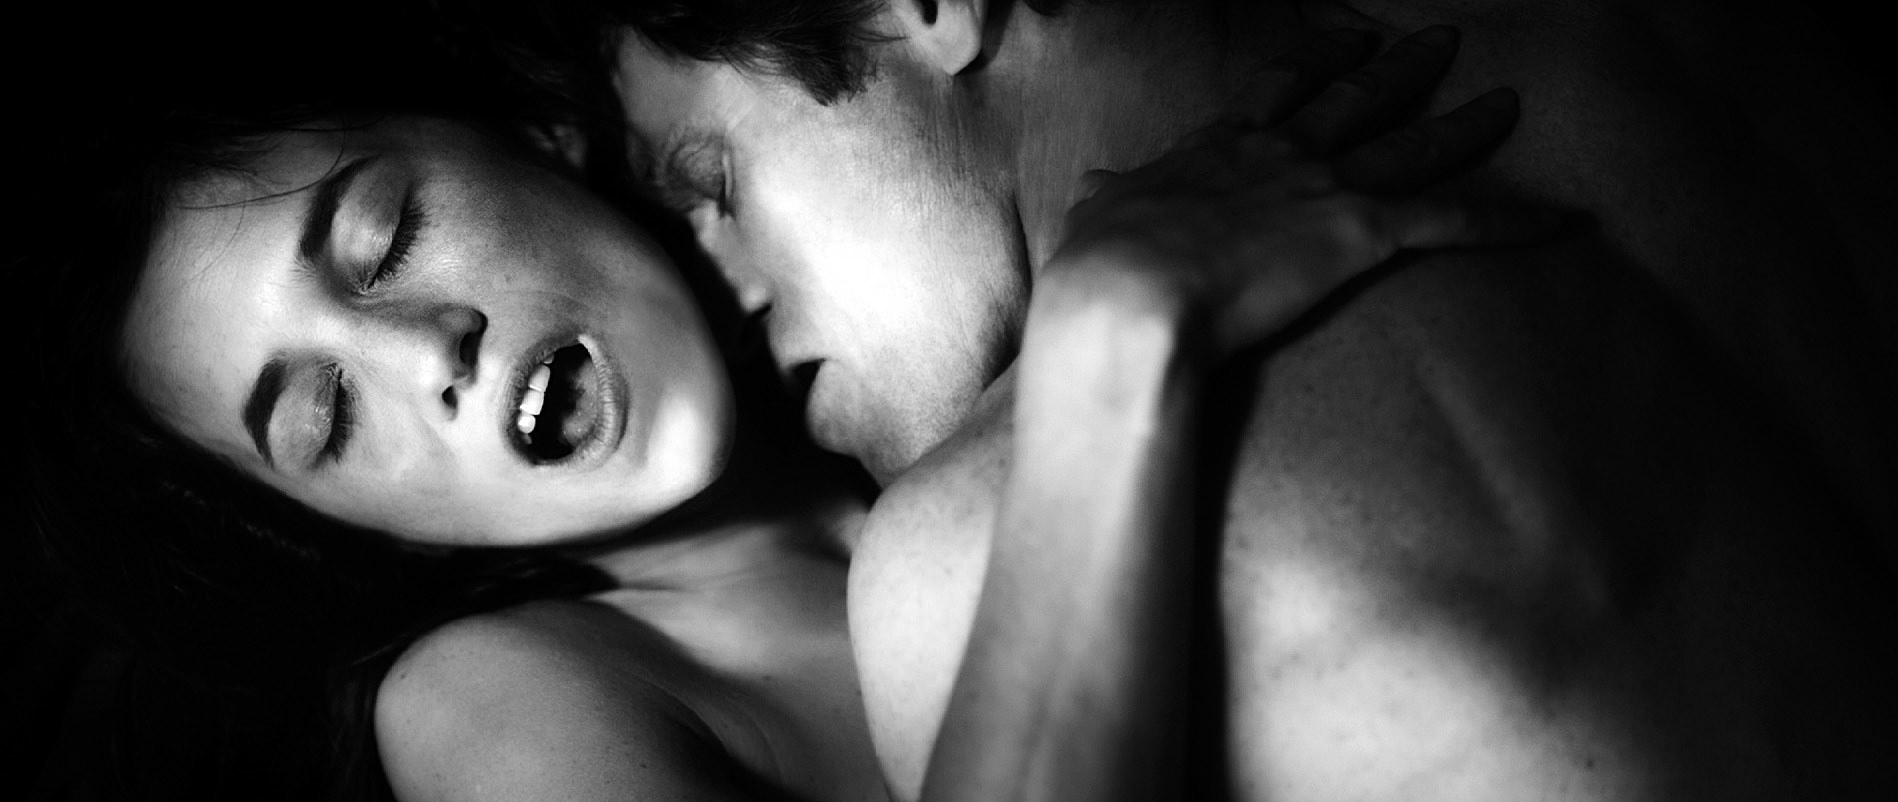 Black-and-white image of two people embracing passionately